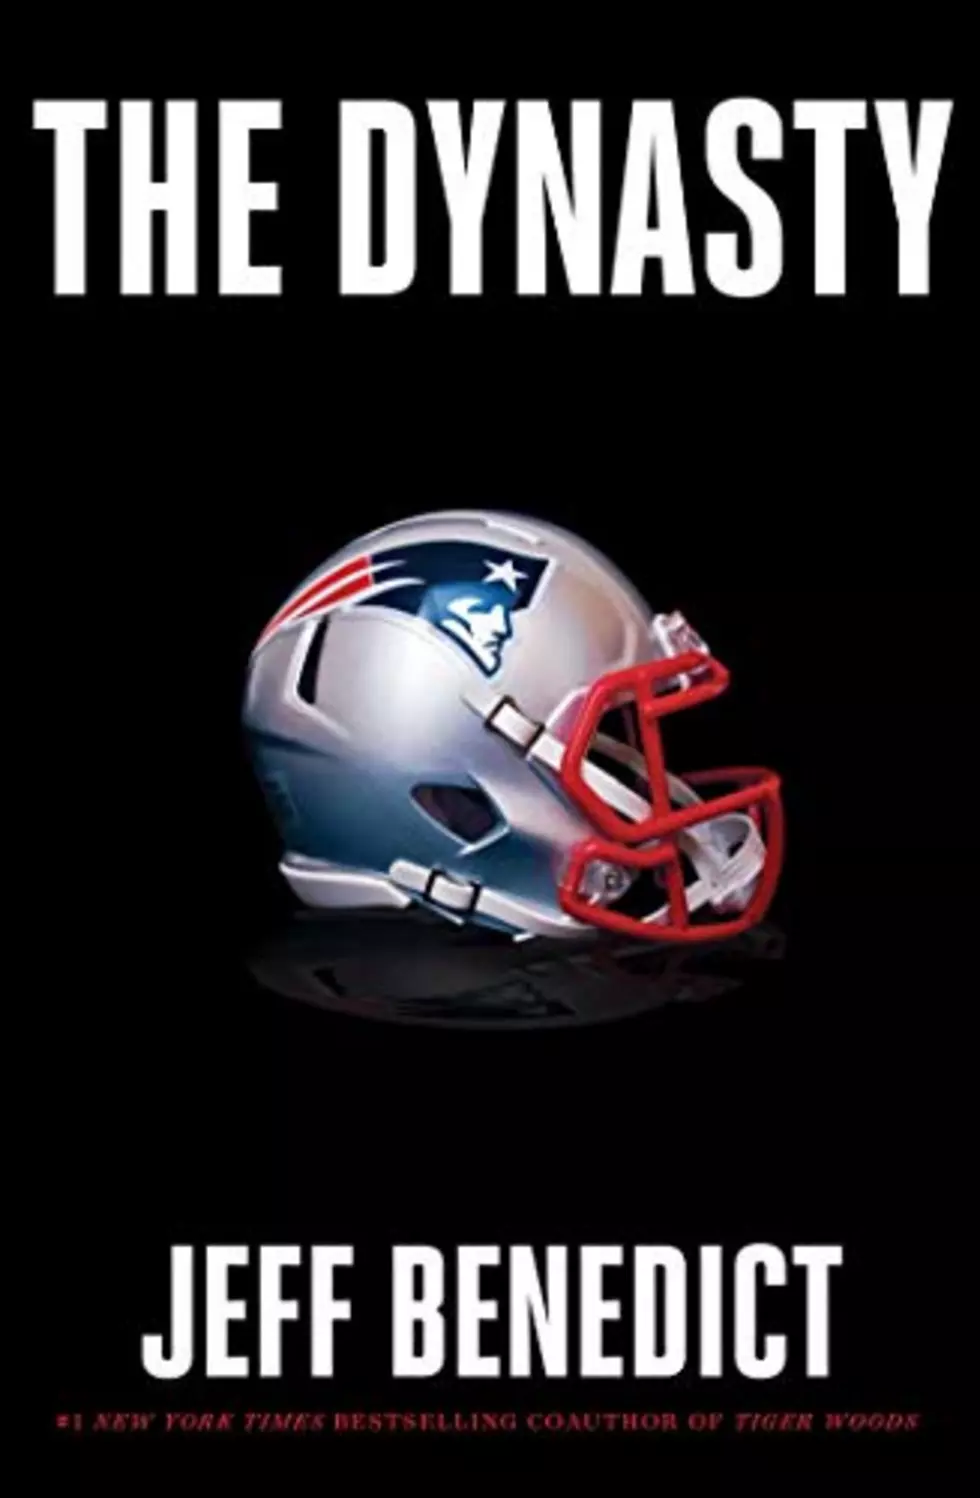 Jeff Benedict, Author of &#8220;The Dynasty,&#8221; Talks His 2-Years In NE